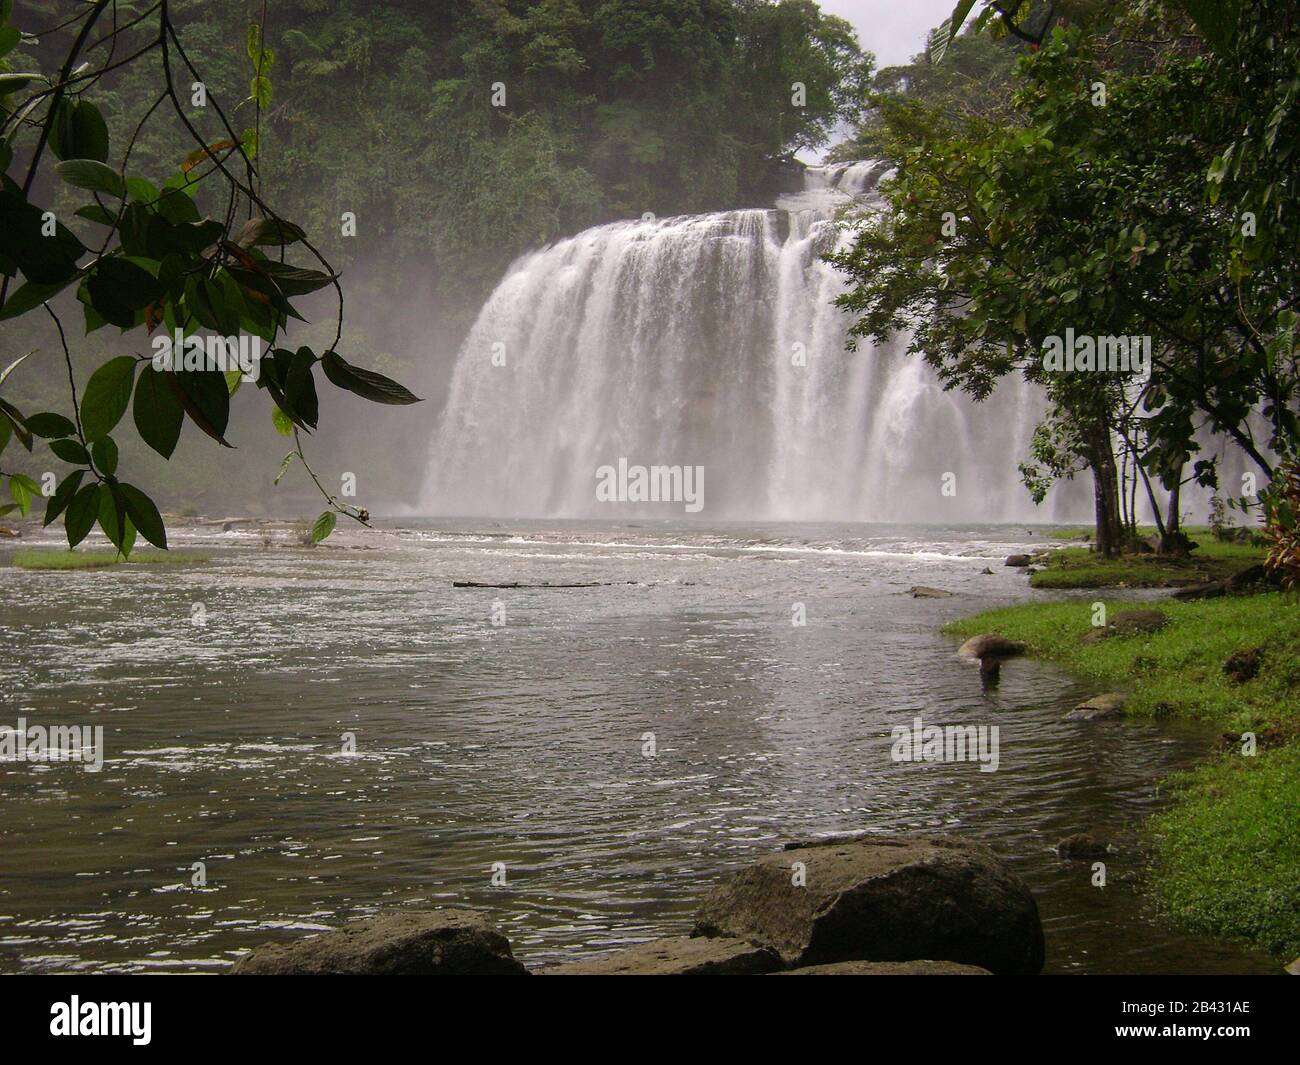 Tinuy-an Falls, dubbed as the Little Niagara Falls and a top attraction in Surigao del Sur, Philippines. Stock Photo